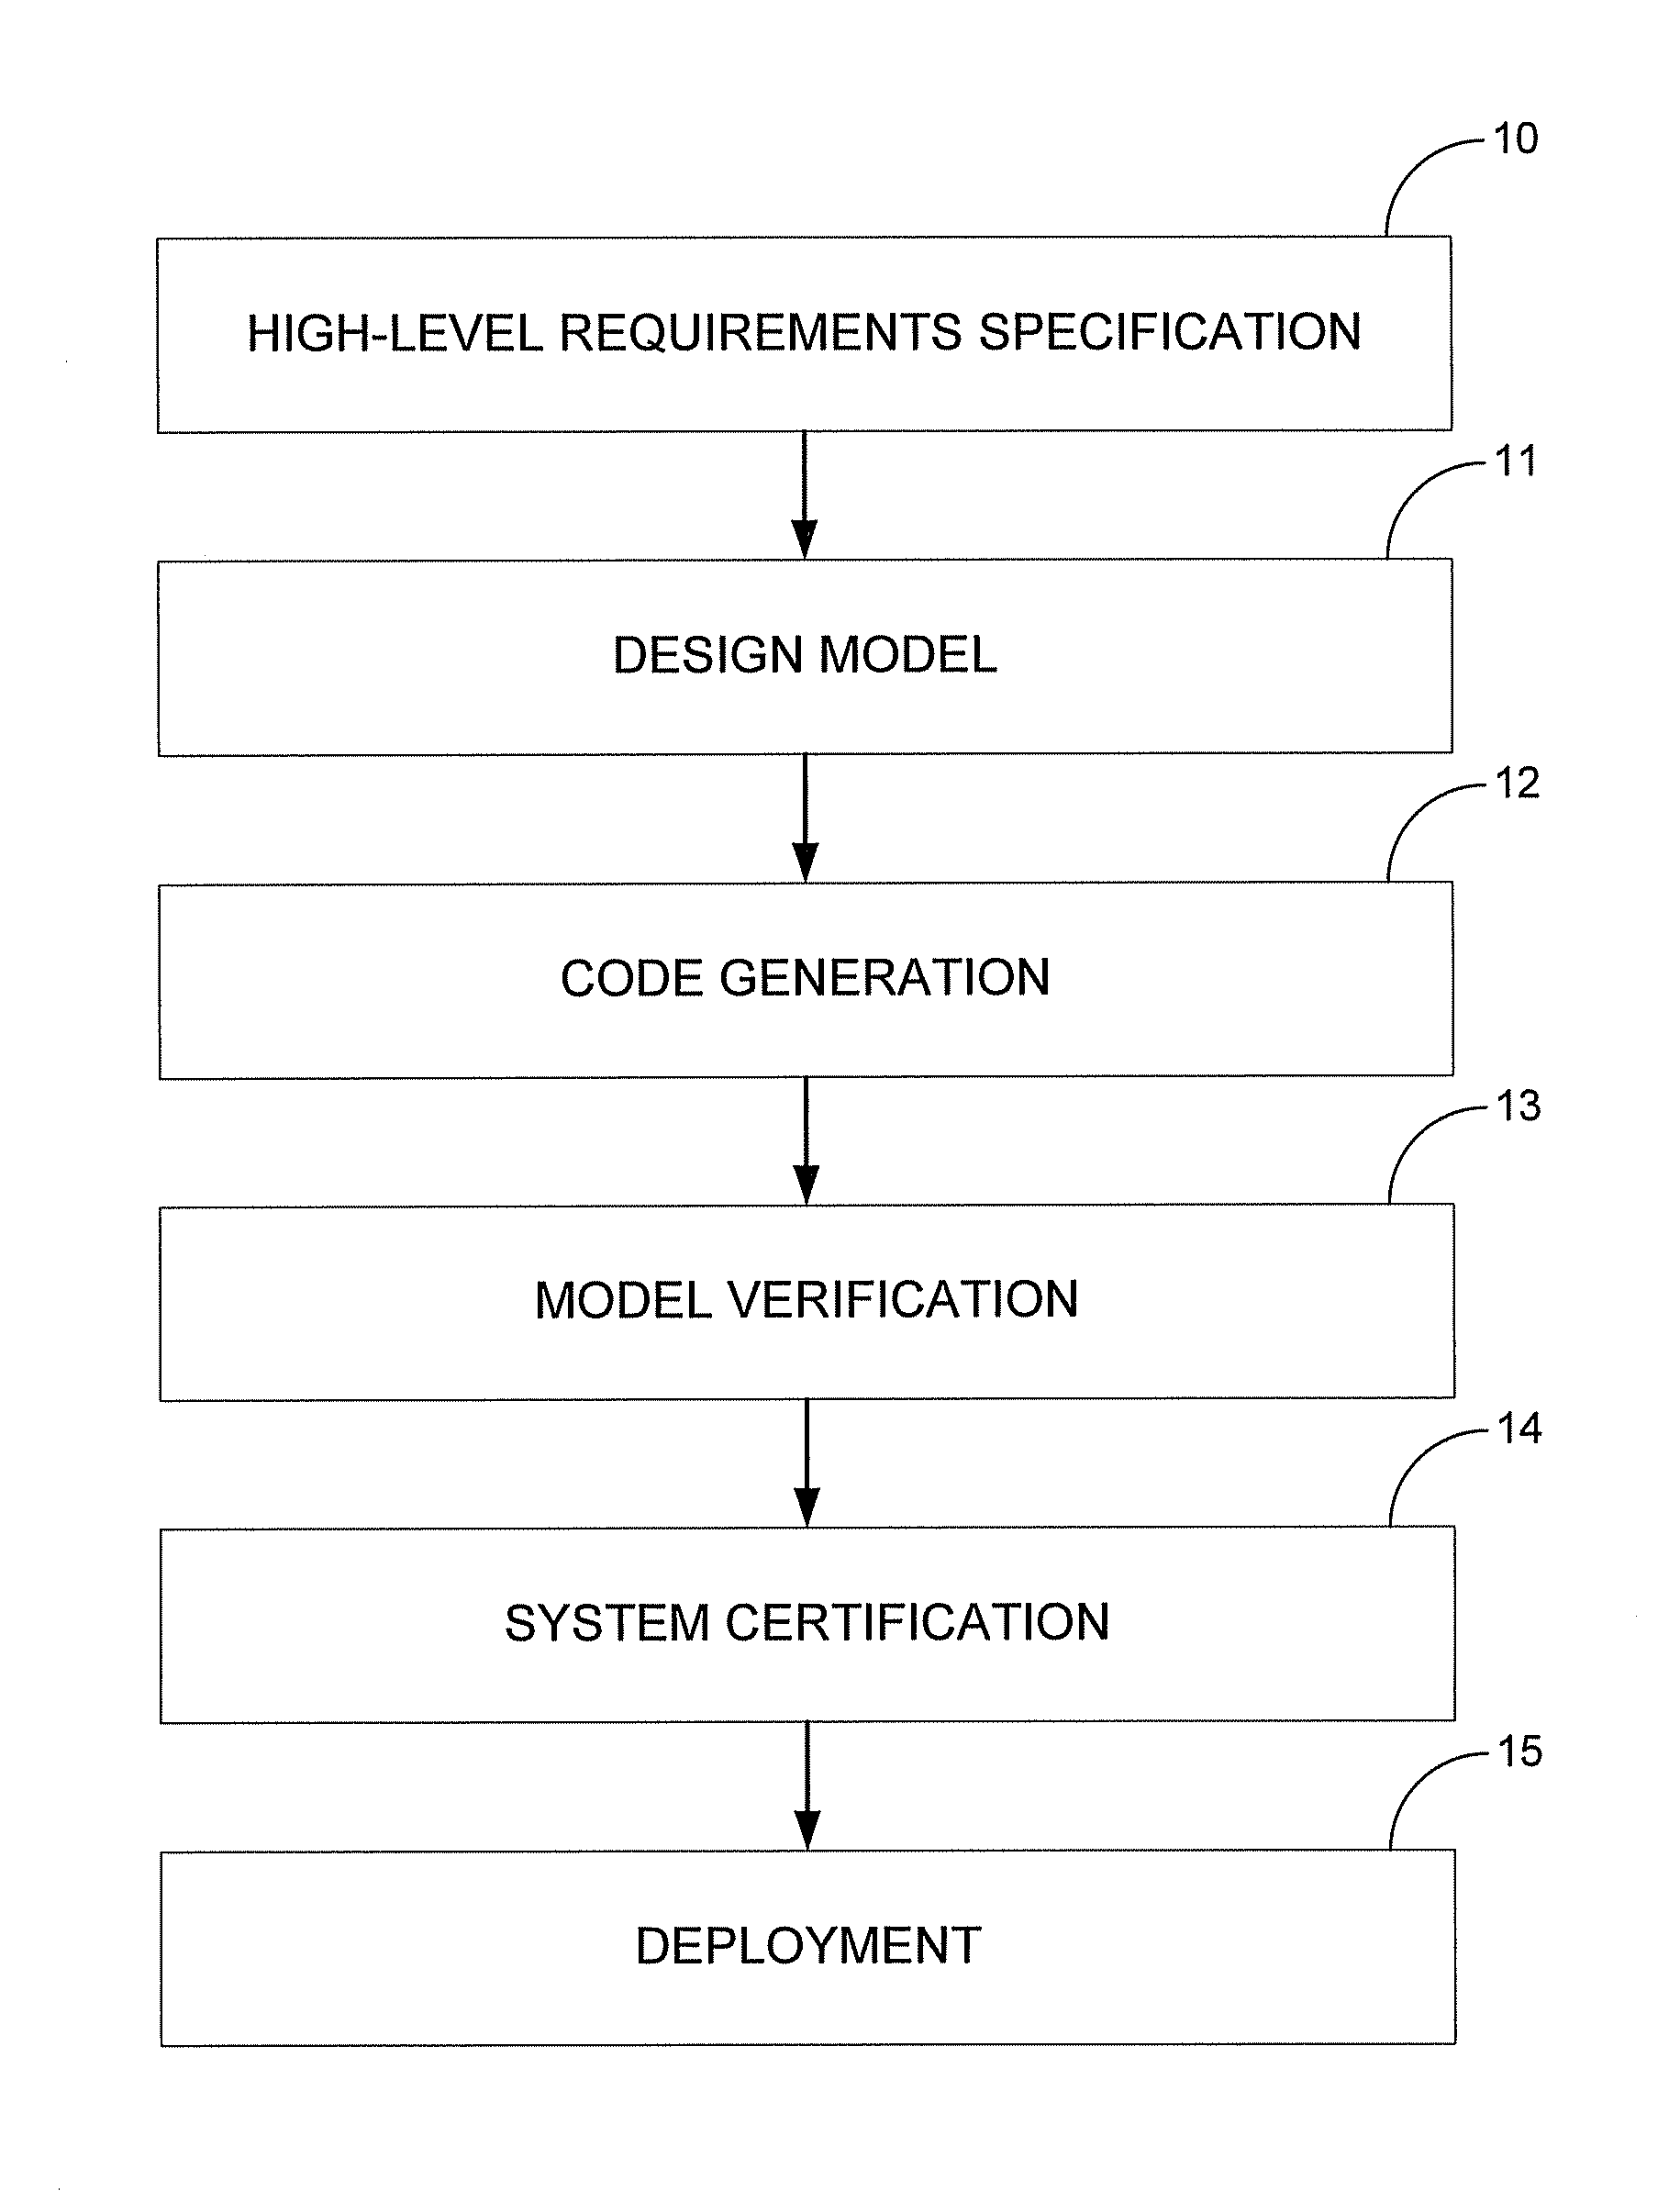 Requirements-Based Test Generation